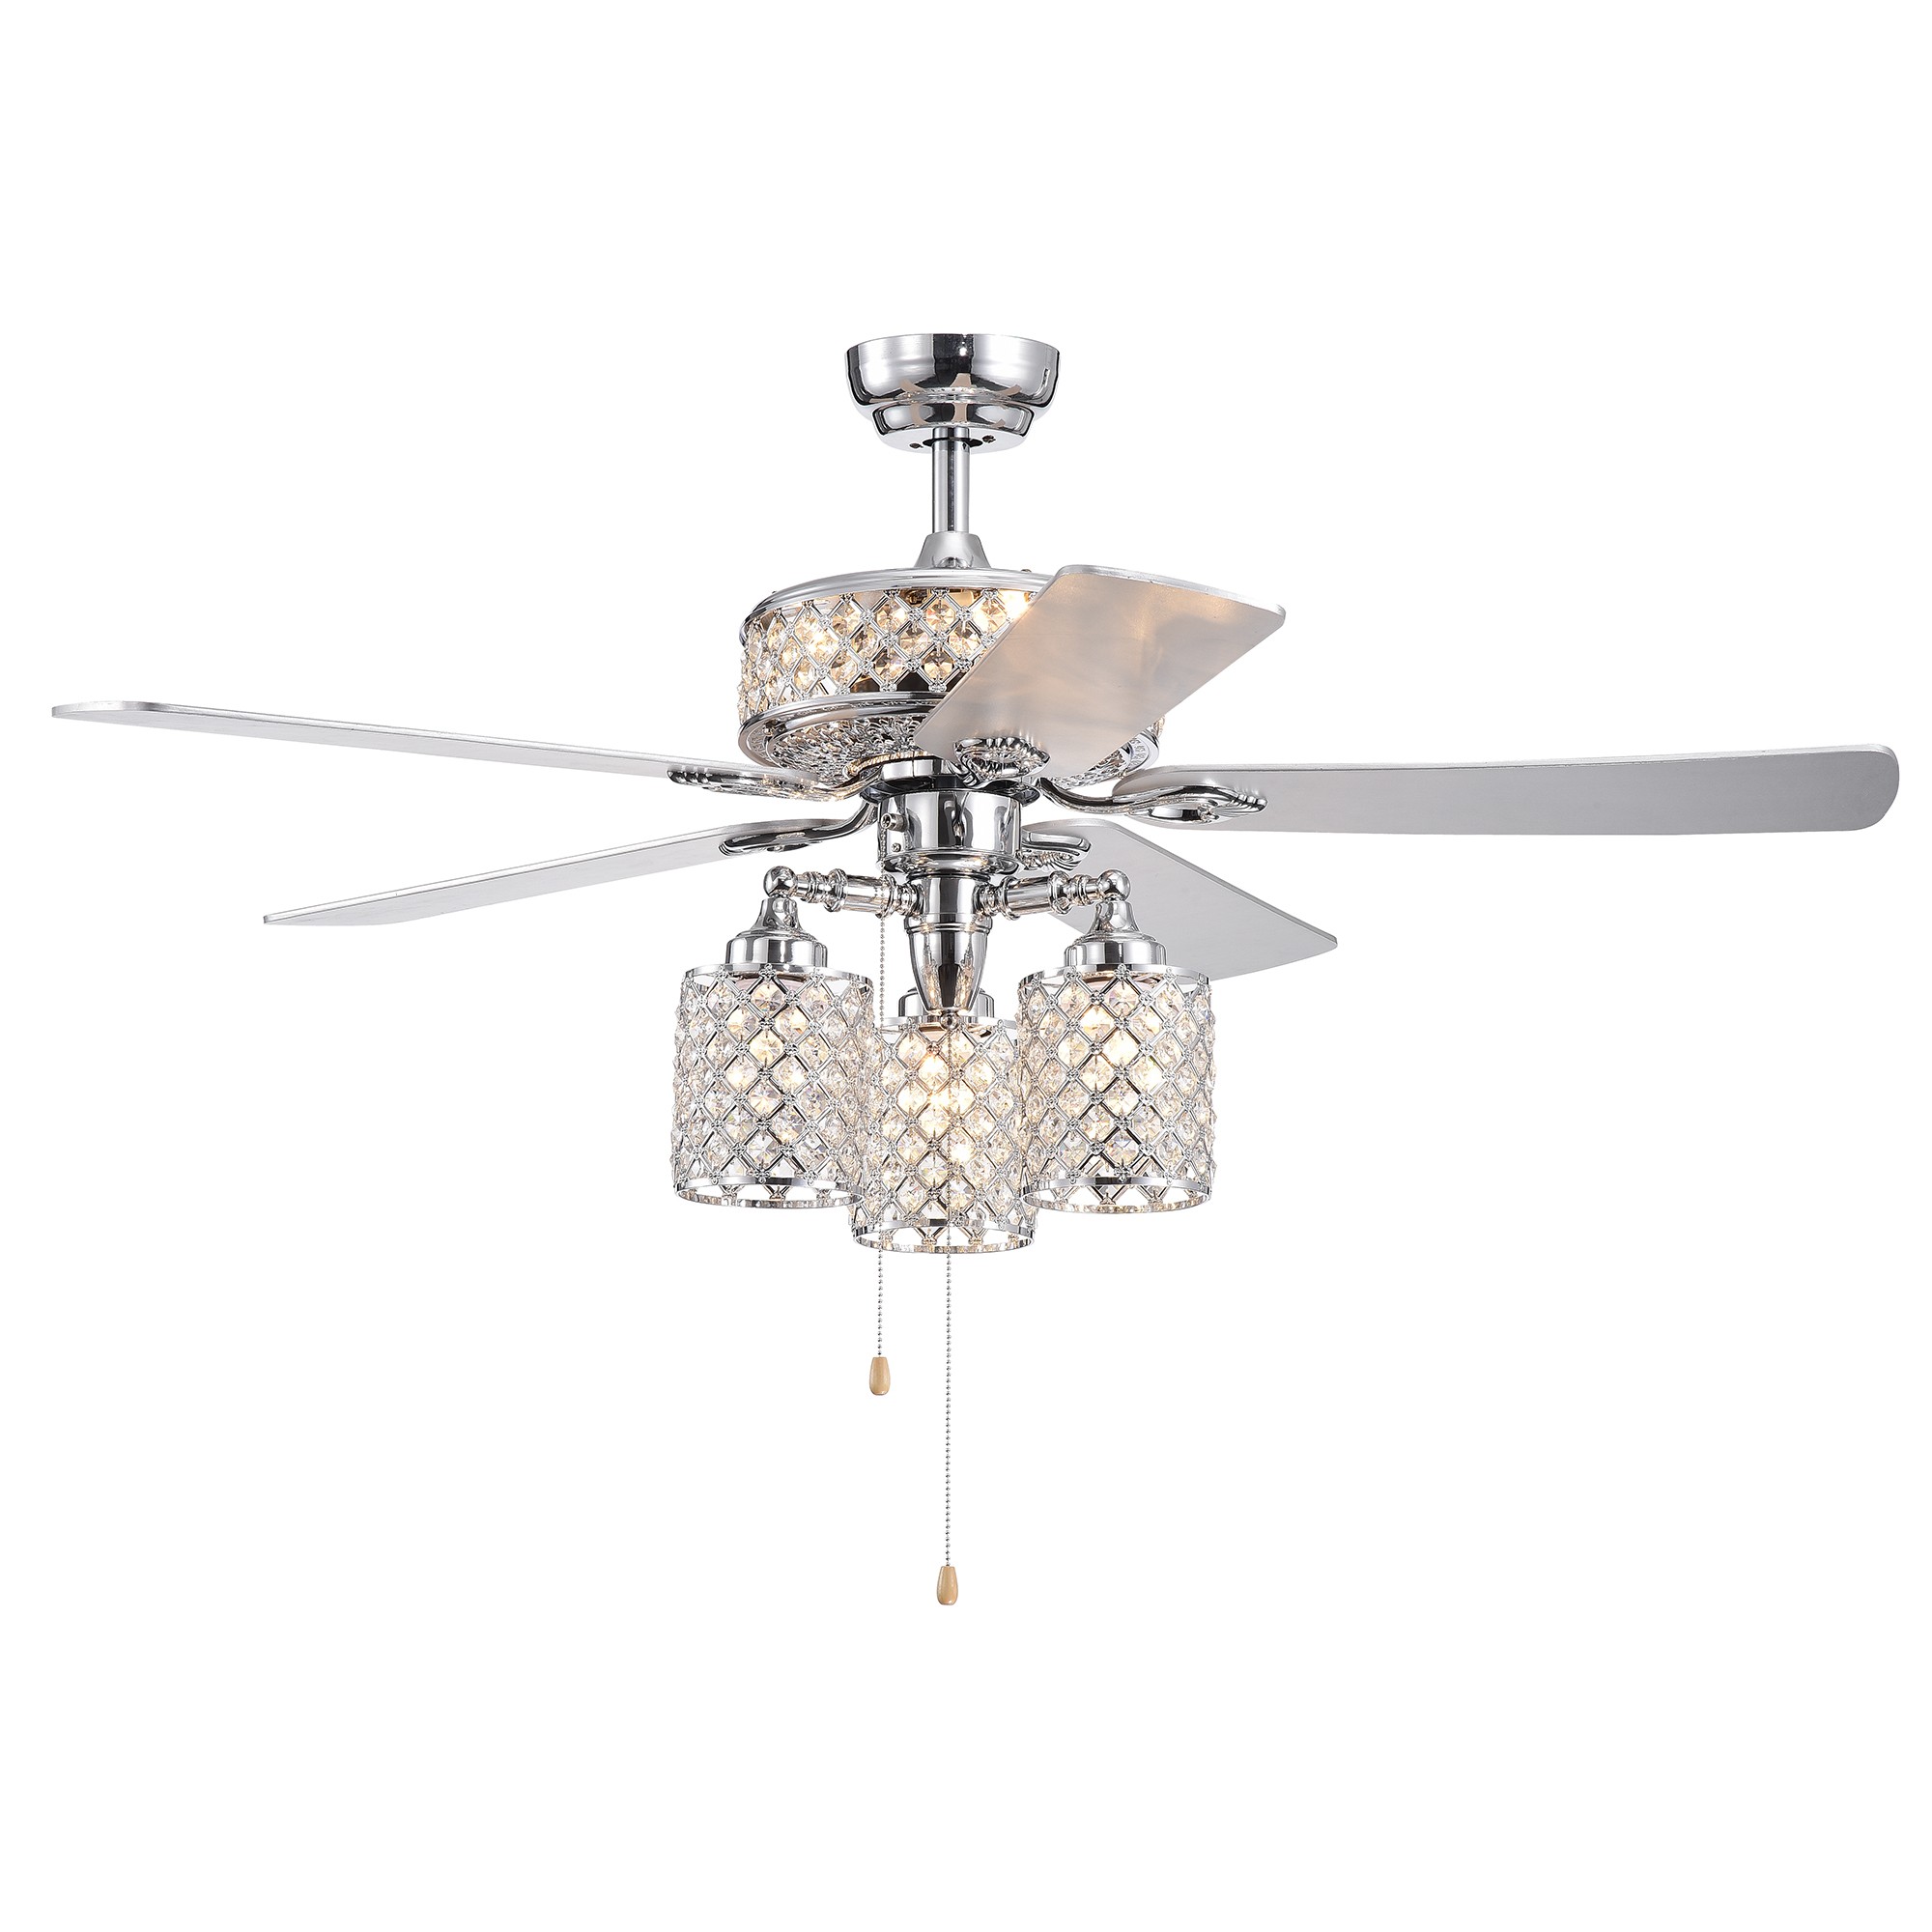 Silver Orchid Lang 52-inch 5-blade Chrome Lighted Ceiling Fan